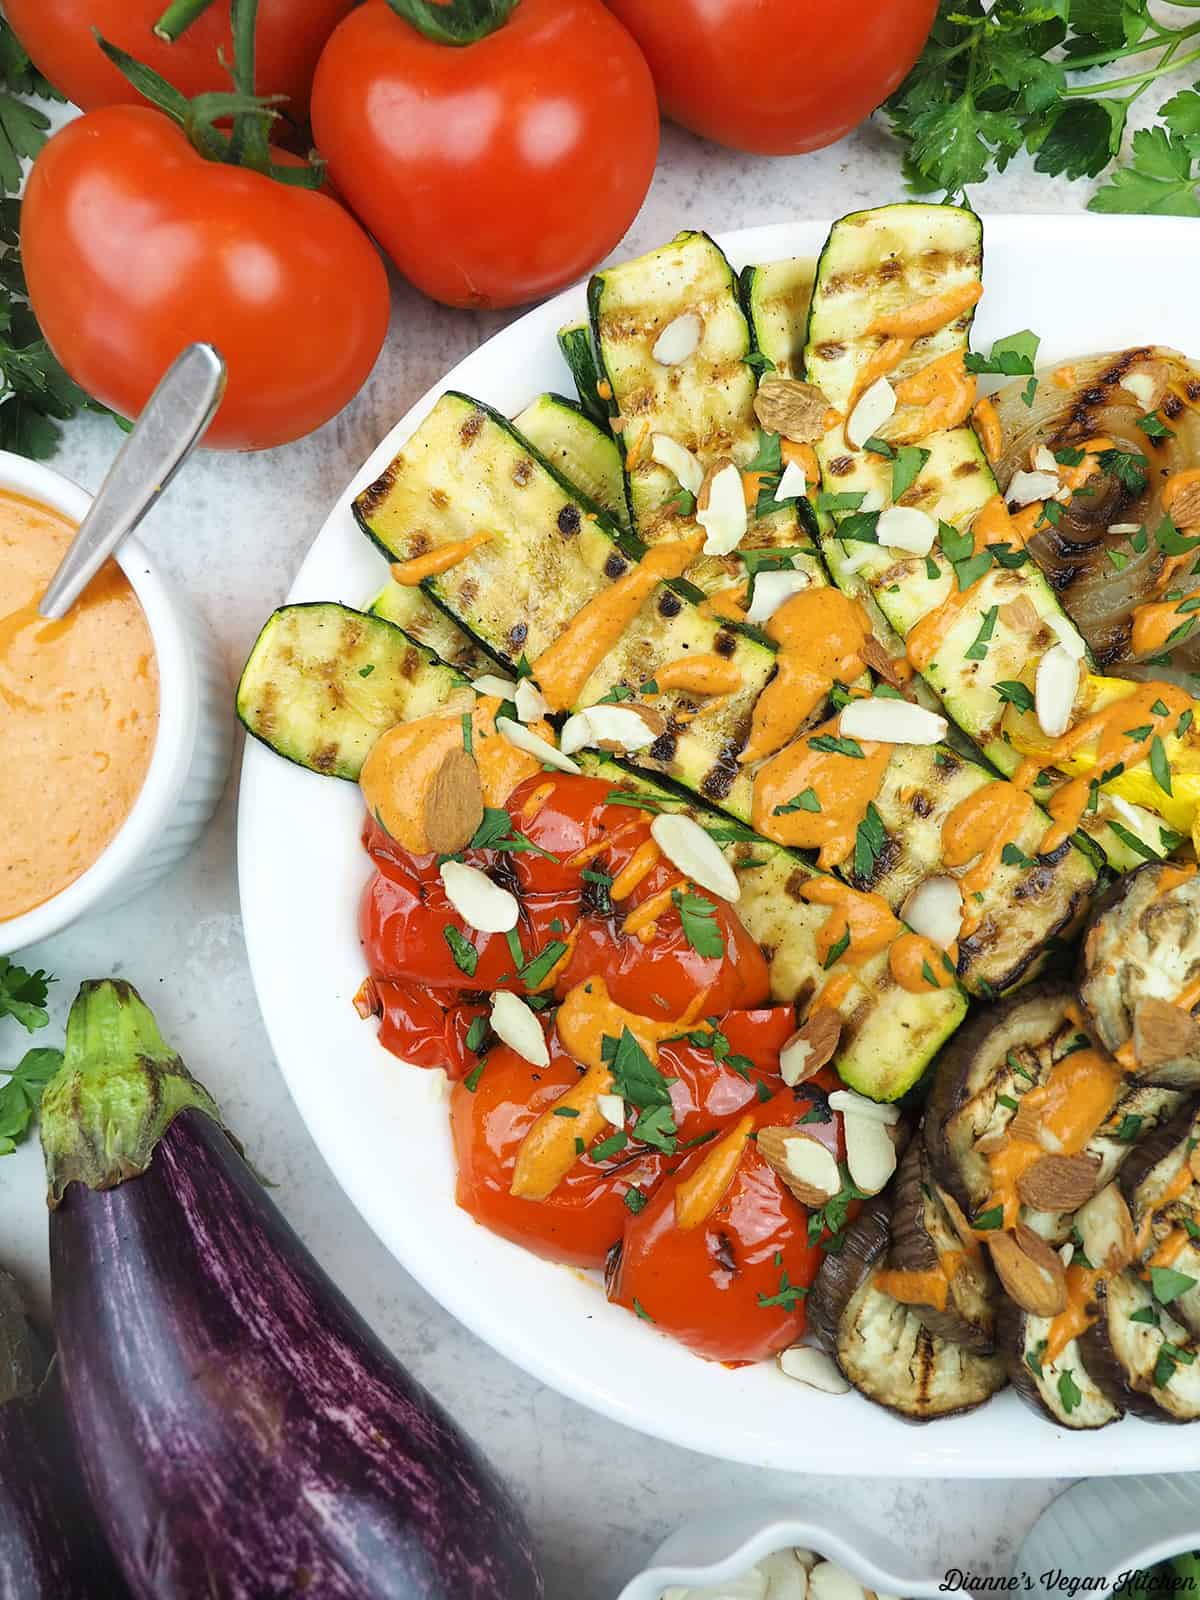 platter of grilled vegetables with tomatoes, eggplant, and romesco